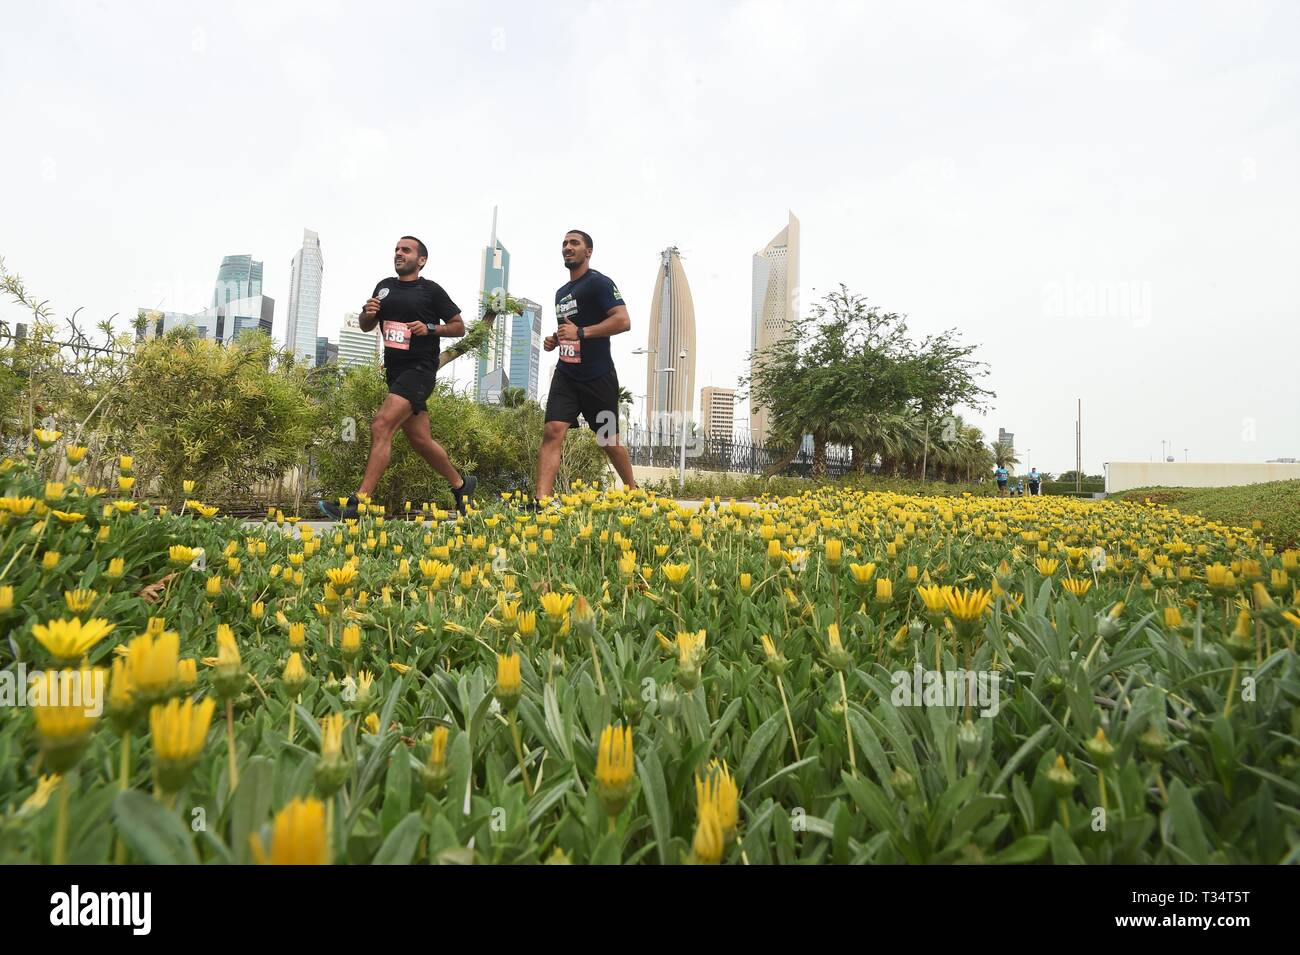 Kuwait City, Kuwait. 6th Apr, 2019. People run during a fitness challenge day event at Al Shaheed Park, one of the largest urban parks in Kuwait City, Kuwait, on April 6, 2019. Credit: Asad/Xinhua/Alamy Live News Stock Photo